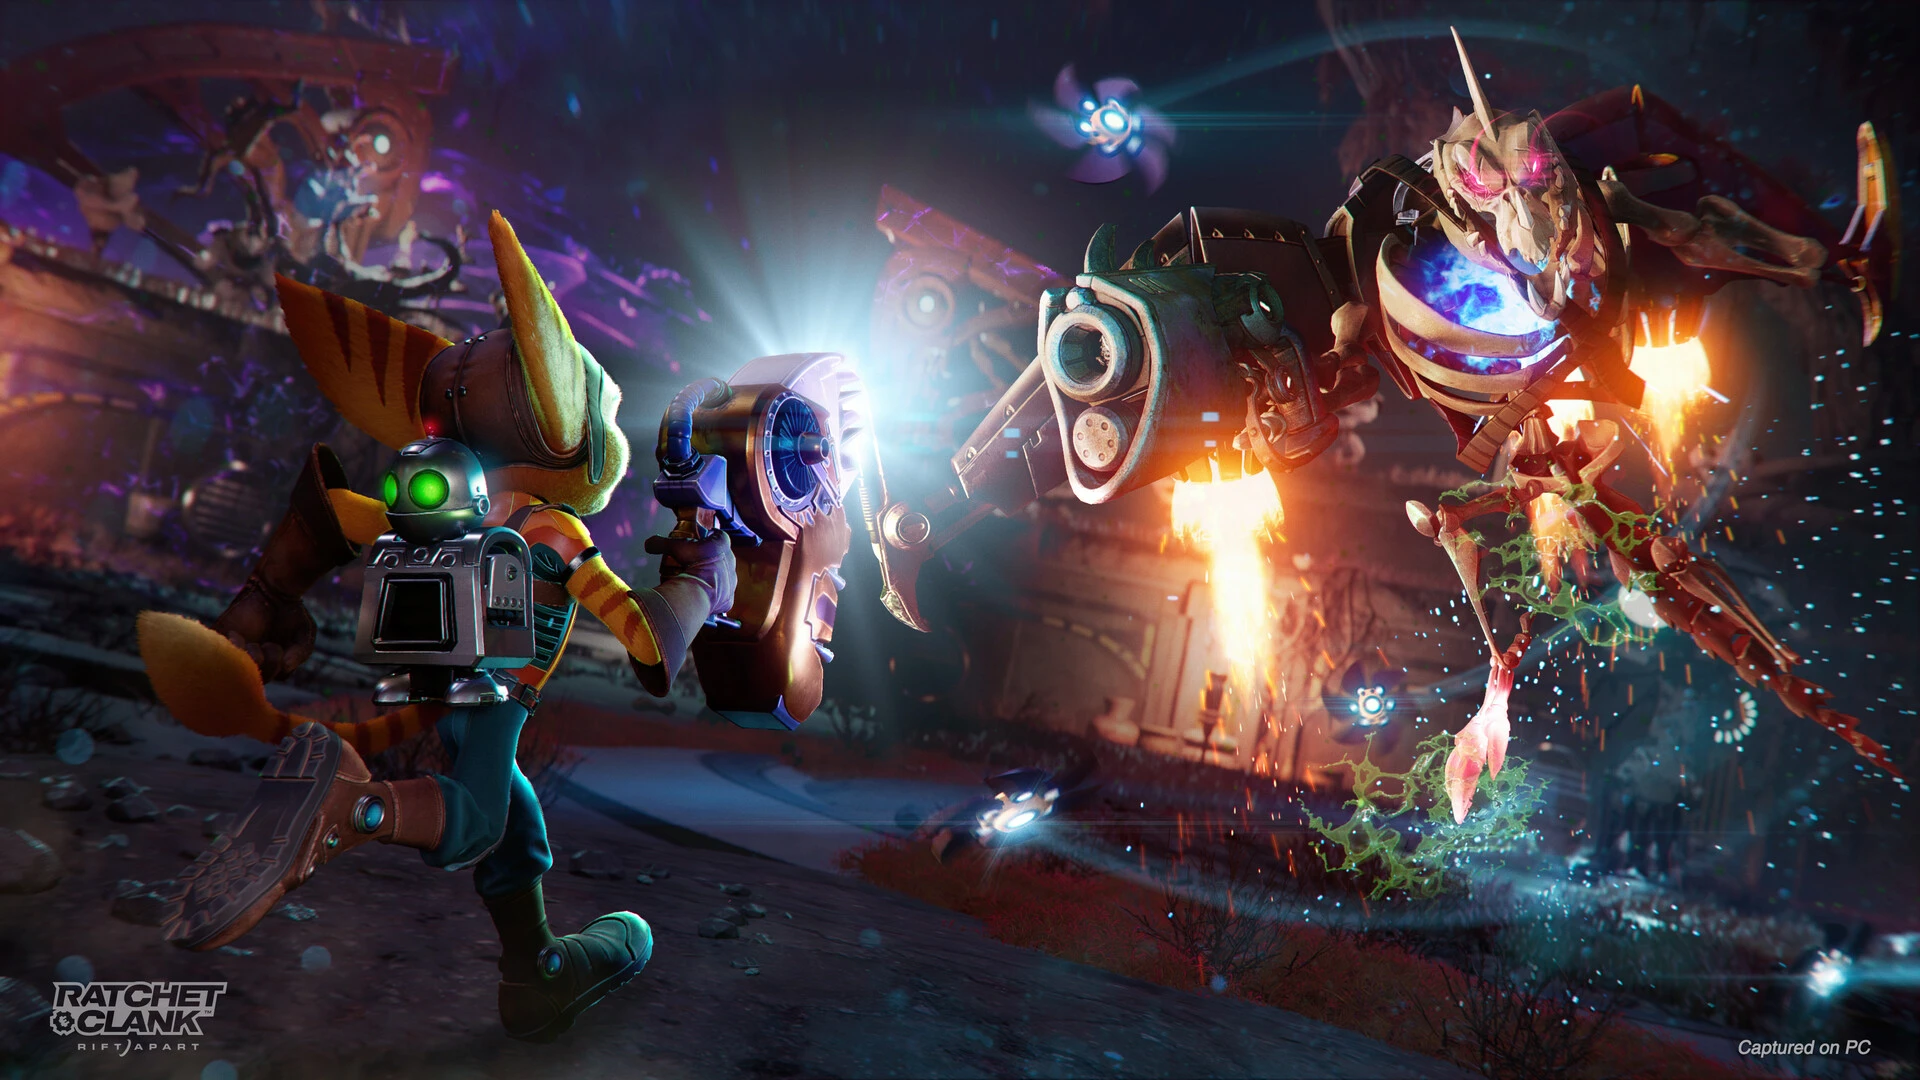 Ratchet-and-Clank-is-coming-to-PC-on-July-26-with-enhanced-features